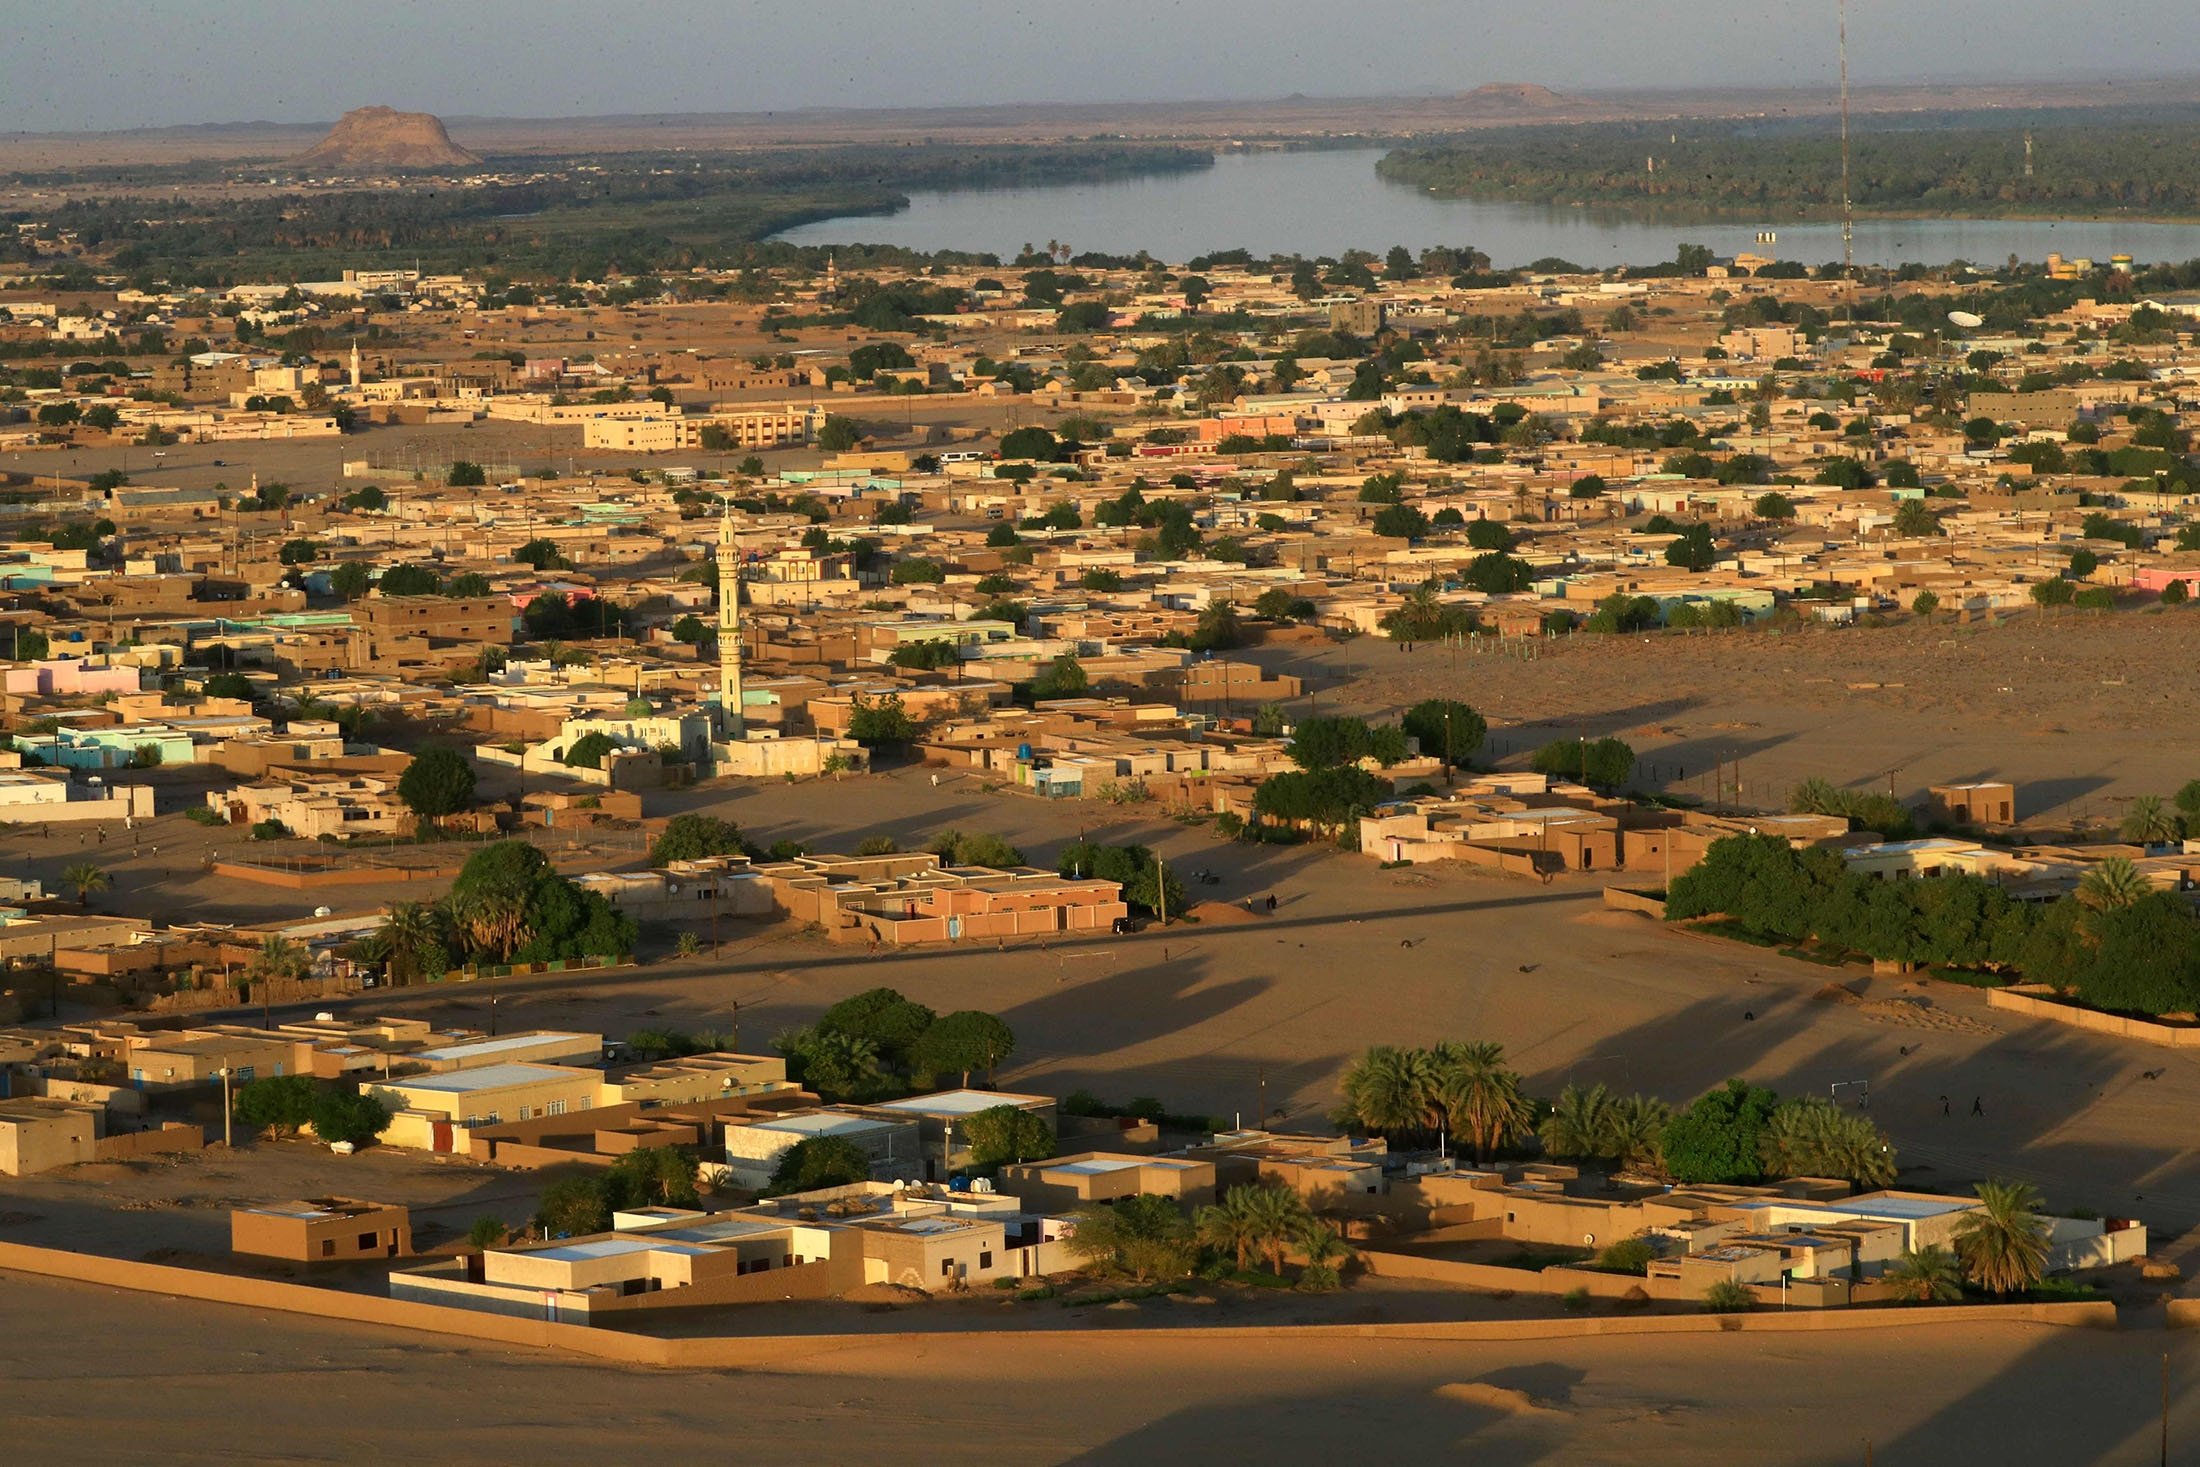 A view of the Nile river flowing through Karima city, in Northern State, Sudan, Oct. 29, 2022. (AFP Photo)